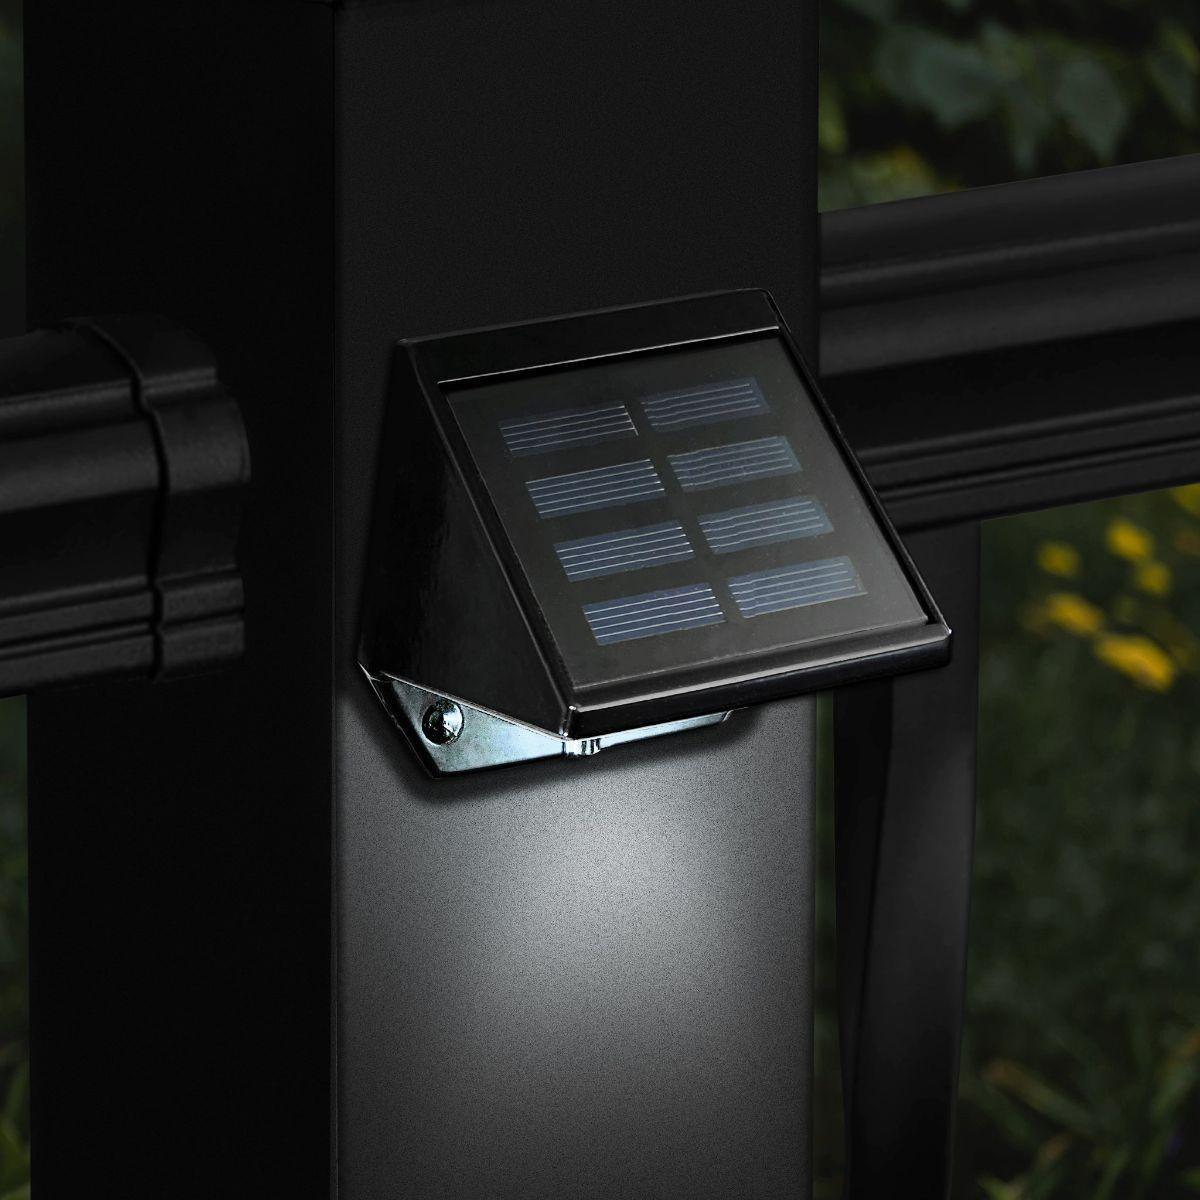 Solar LED Wall Sconce With Photocell 12 Lumens 4500K (Pack of 2) - Bees Lighting